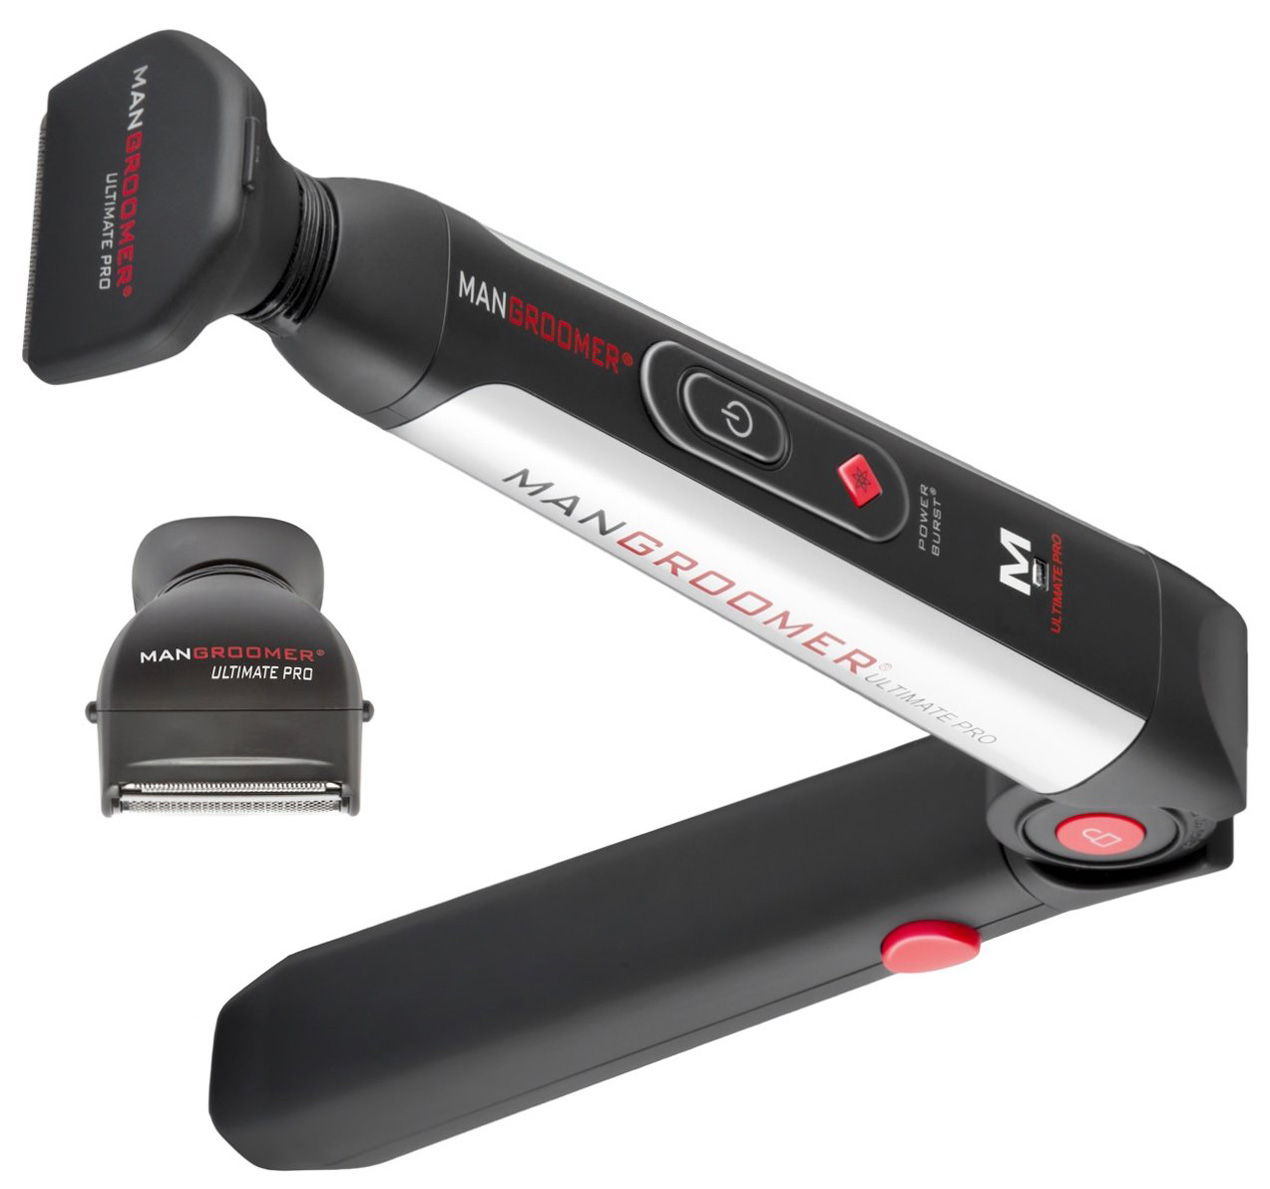 MANGROOMER – ULTIMATE PRO Back Shaver with 2 Shock Absorber Flex Heads, Power Hinge, Extreme Reach Handle and Power Burst